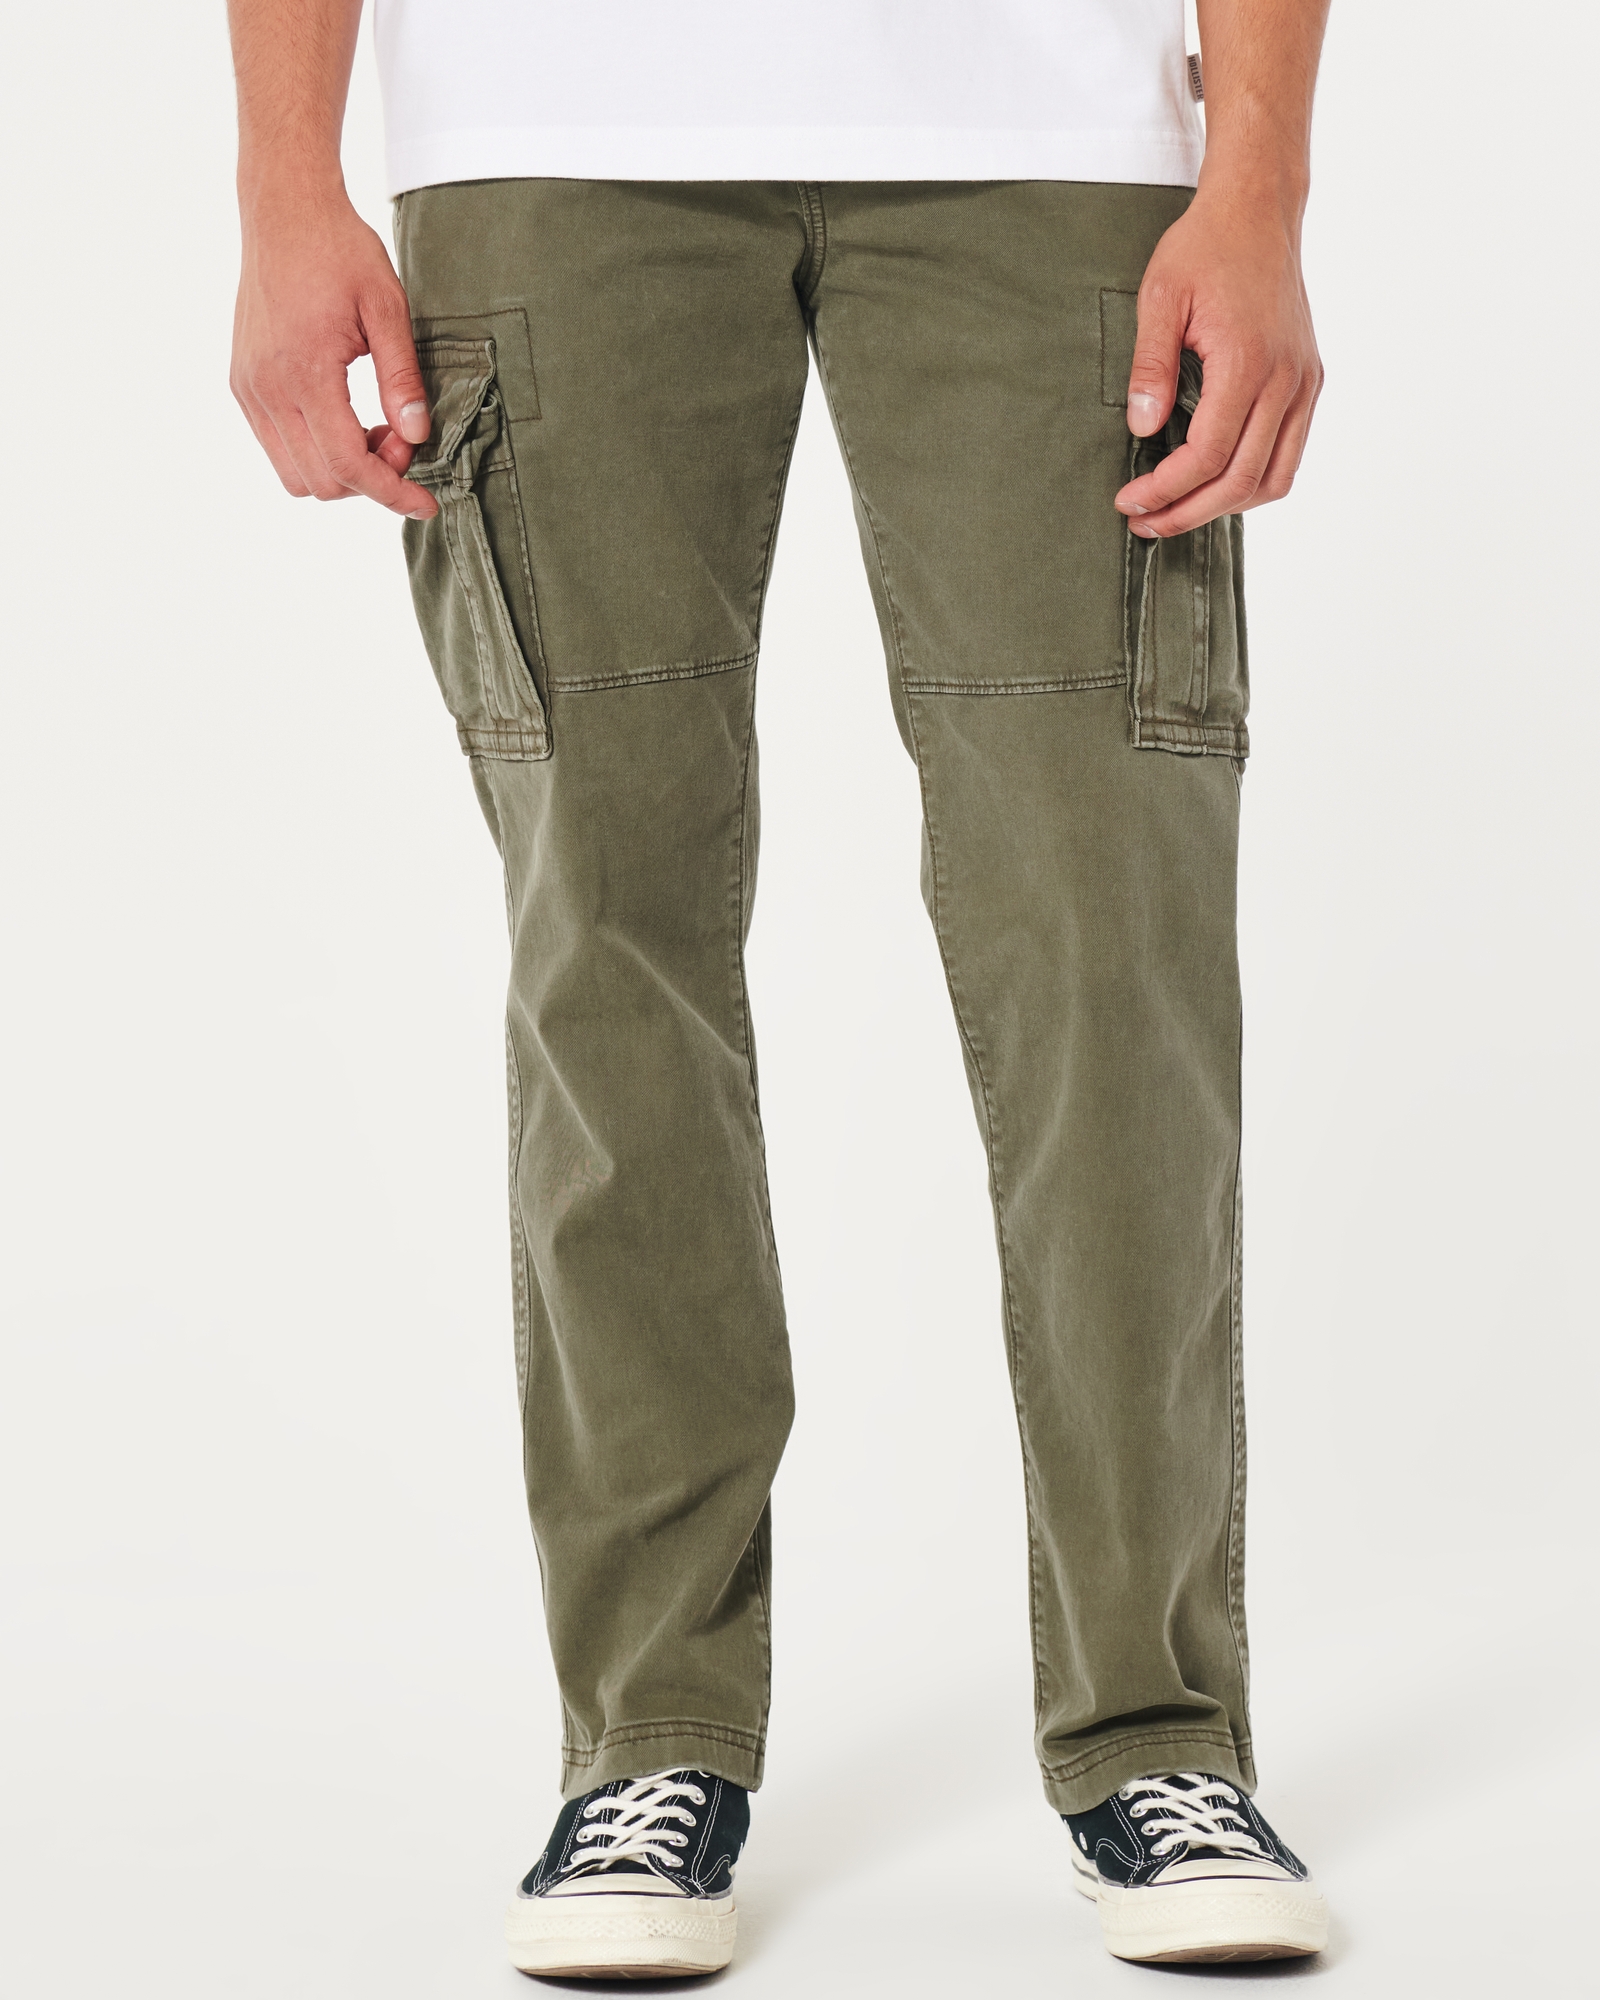 Hollister, Jeans, Green Cargo Pants From Hollister Soft And Comfortable